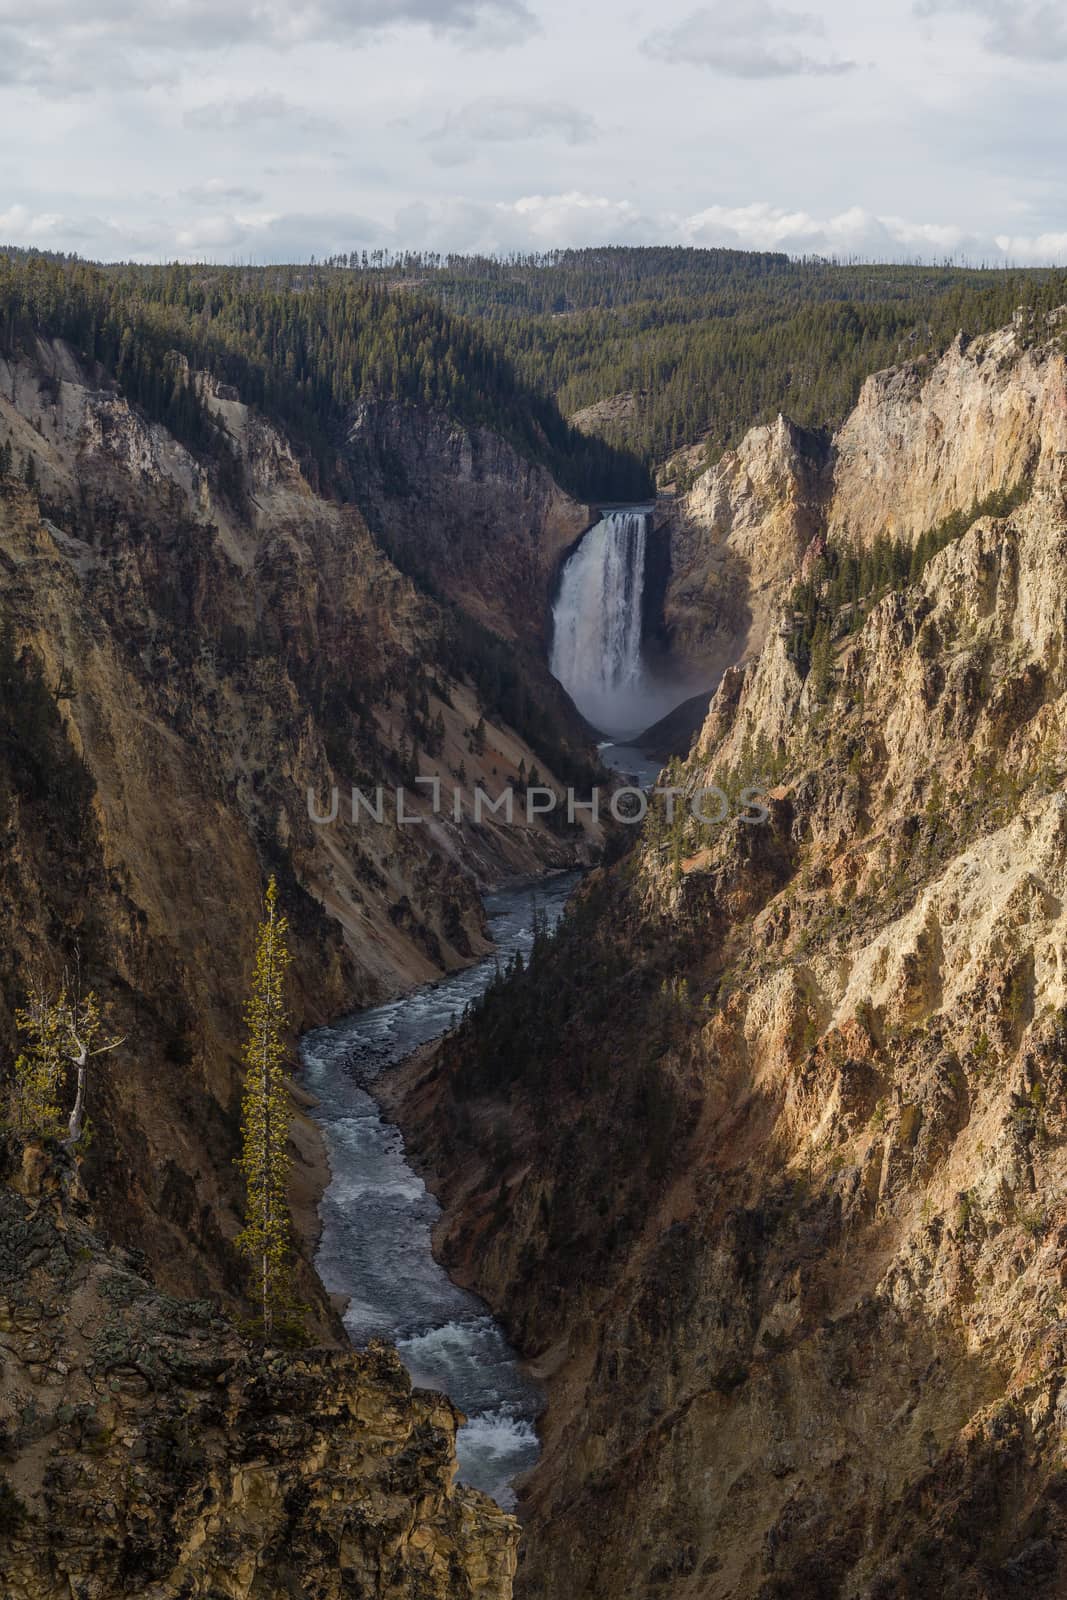 Looking out at the Lower Falls of the Grand Canyon of Yellowstone from Artist Point on the South Rim.